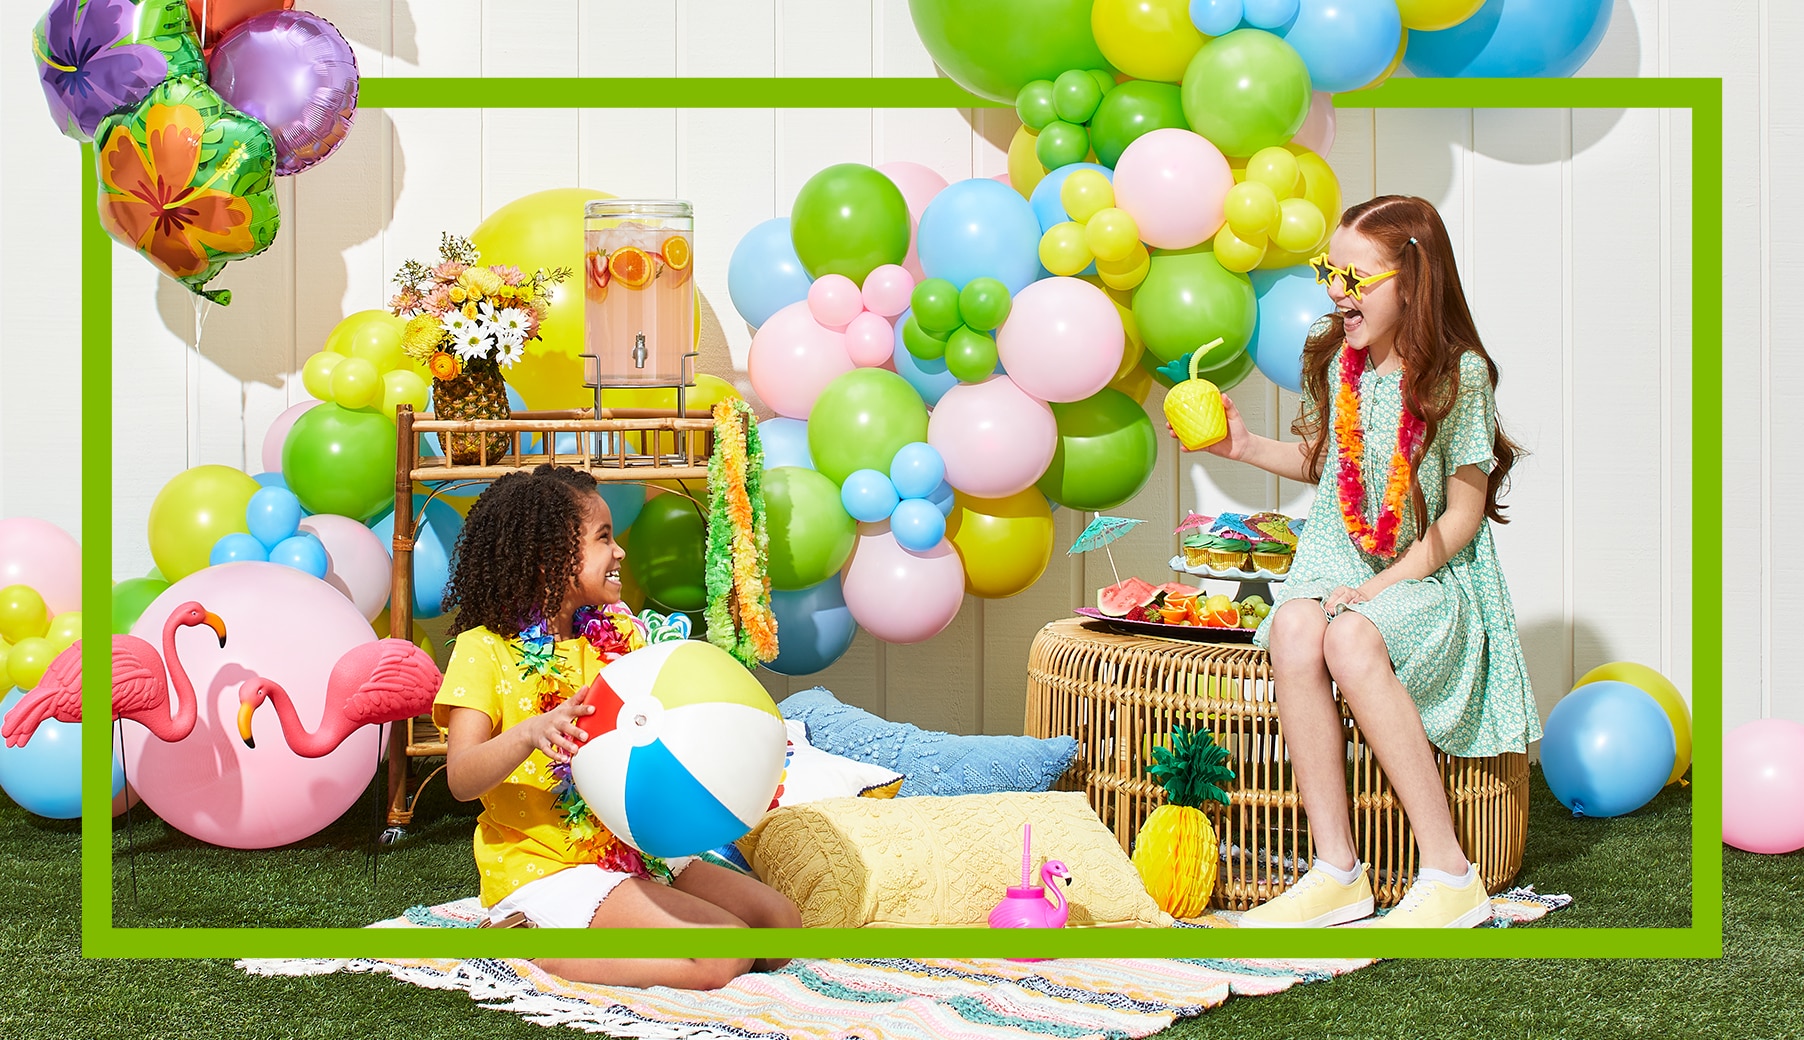 Two girls looking at each other in front of a bouquet of mermaid-themed balloons and a large number 6 balloon.